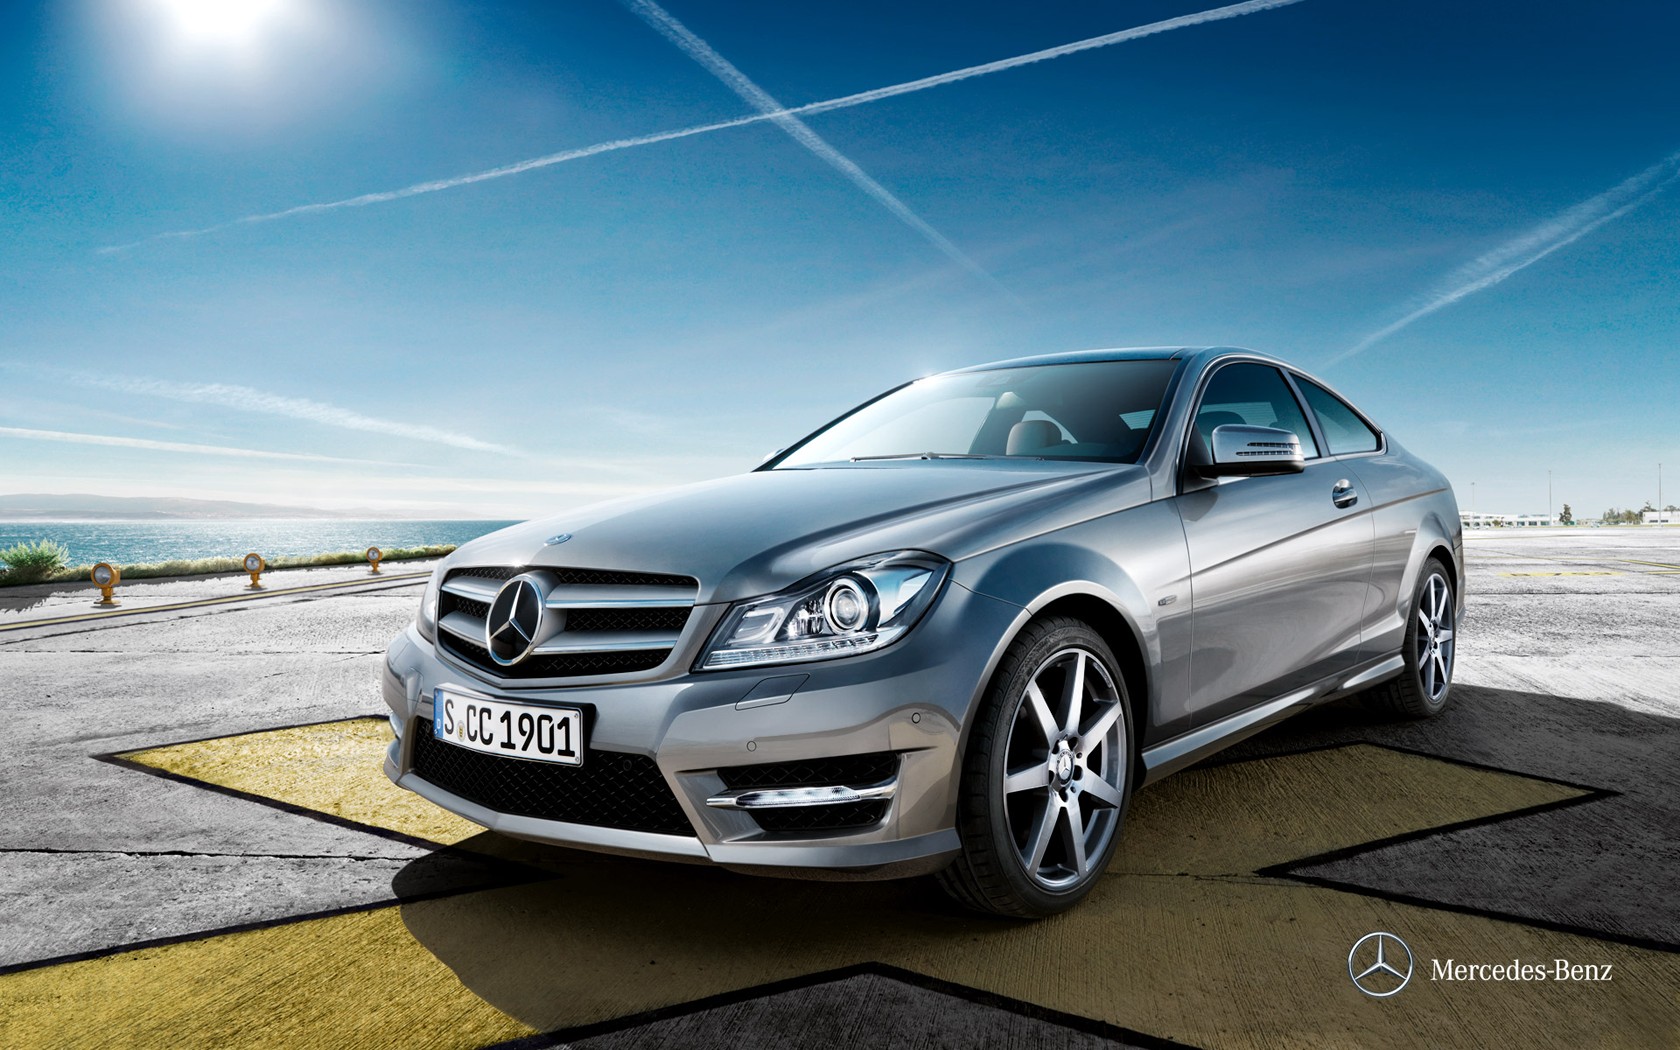 Mercedes Benz C Class Coupe Two Door Coupe Wallpaper - Mercedes Benz 2012 C - HD Wallpaper 